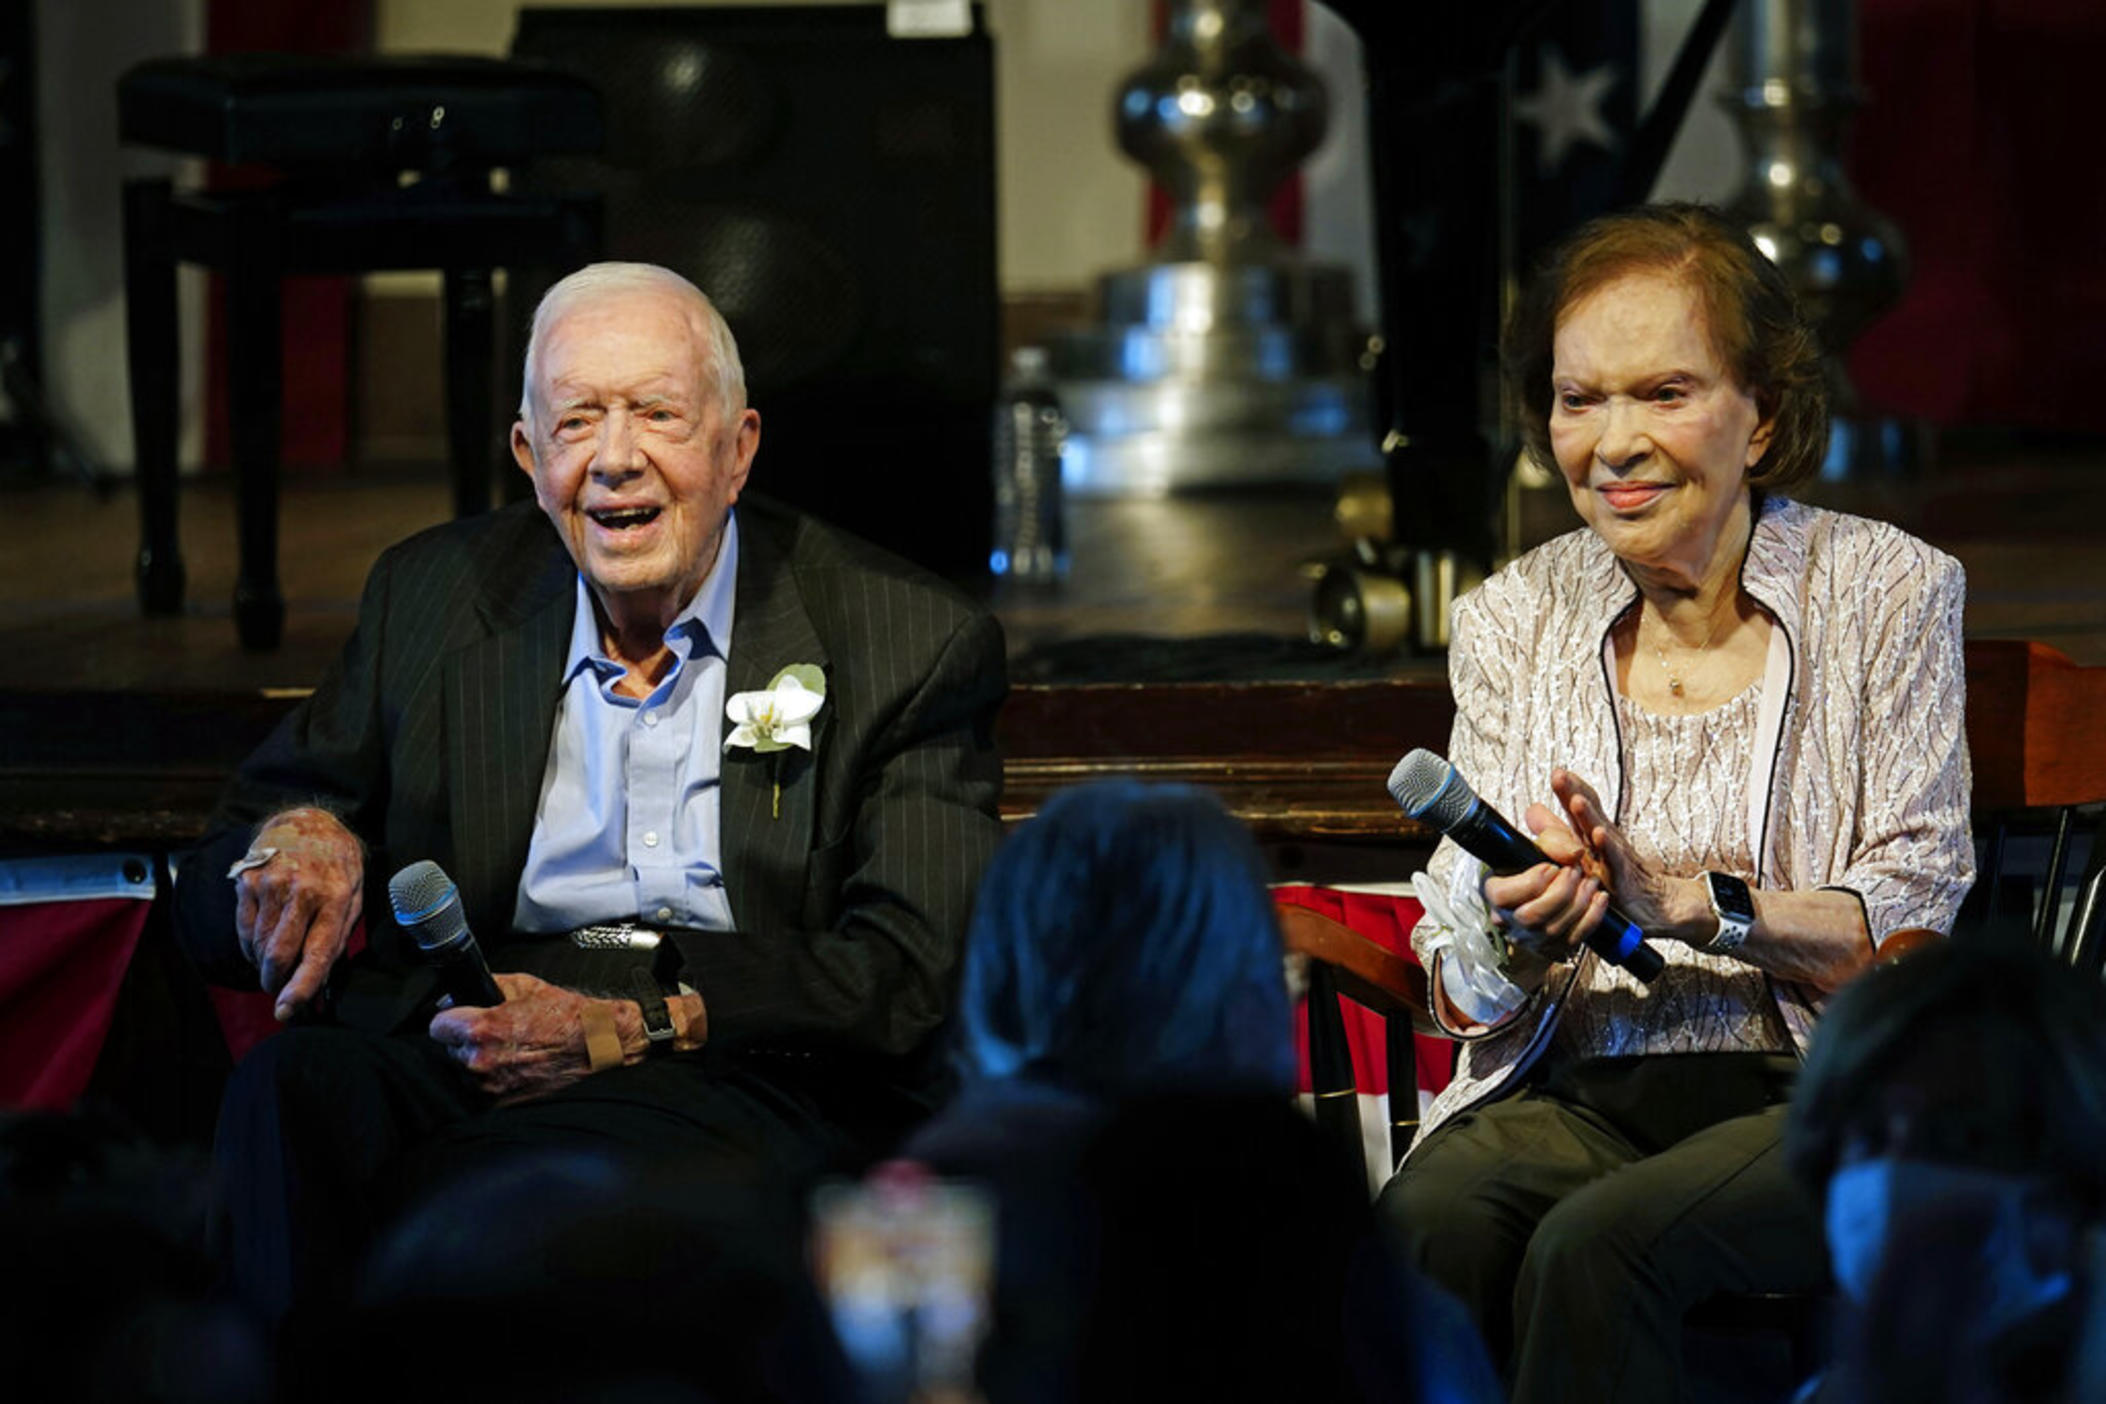 Former U.S. President Jimmy Carter and his wife, former first lady Rosalynn Carter, sit together during a reception to celebrate their 75th wedding anniversary on Saturday, July 10, 2021, in Plains, Ga. On Thursday, Aug. 18, 2022, Carter, the second-oldest U.S. first lady ever, turns 95. 